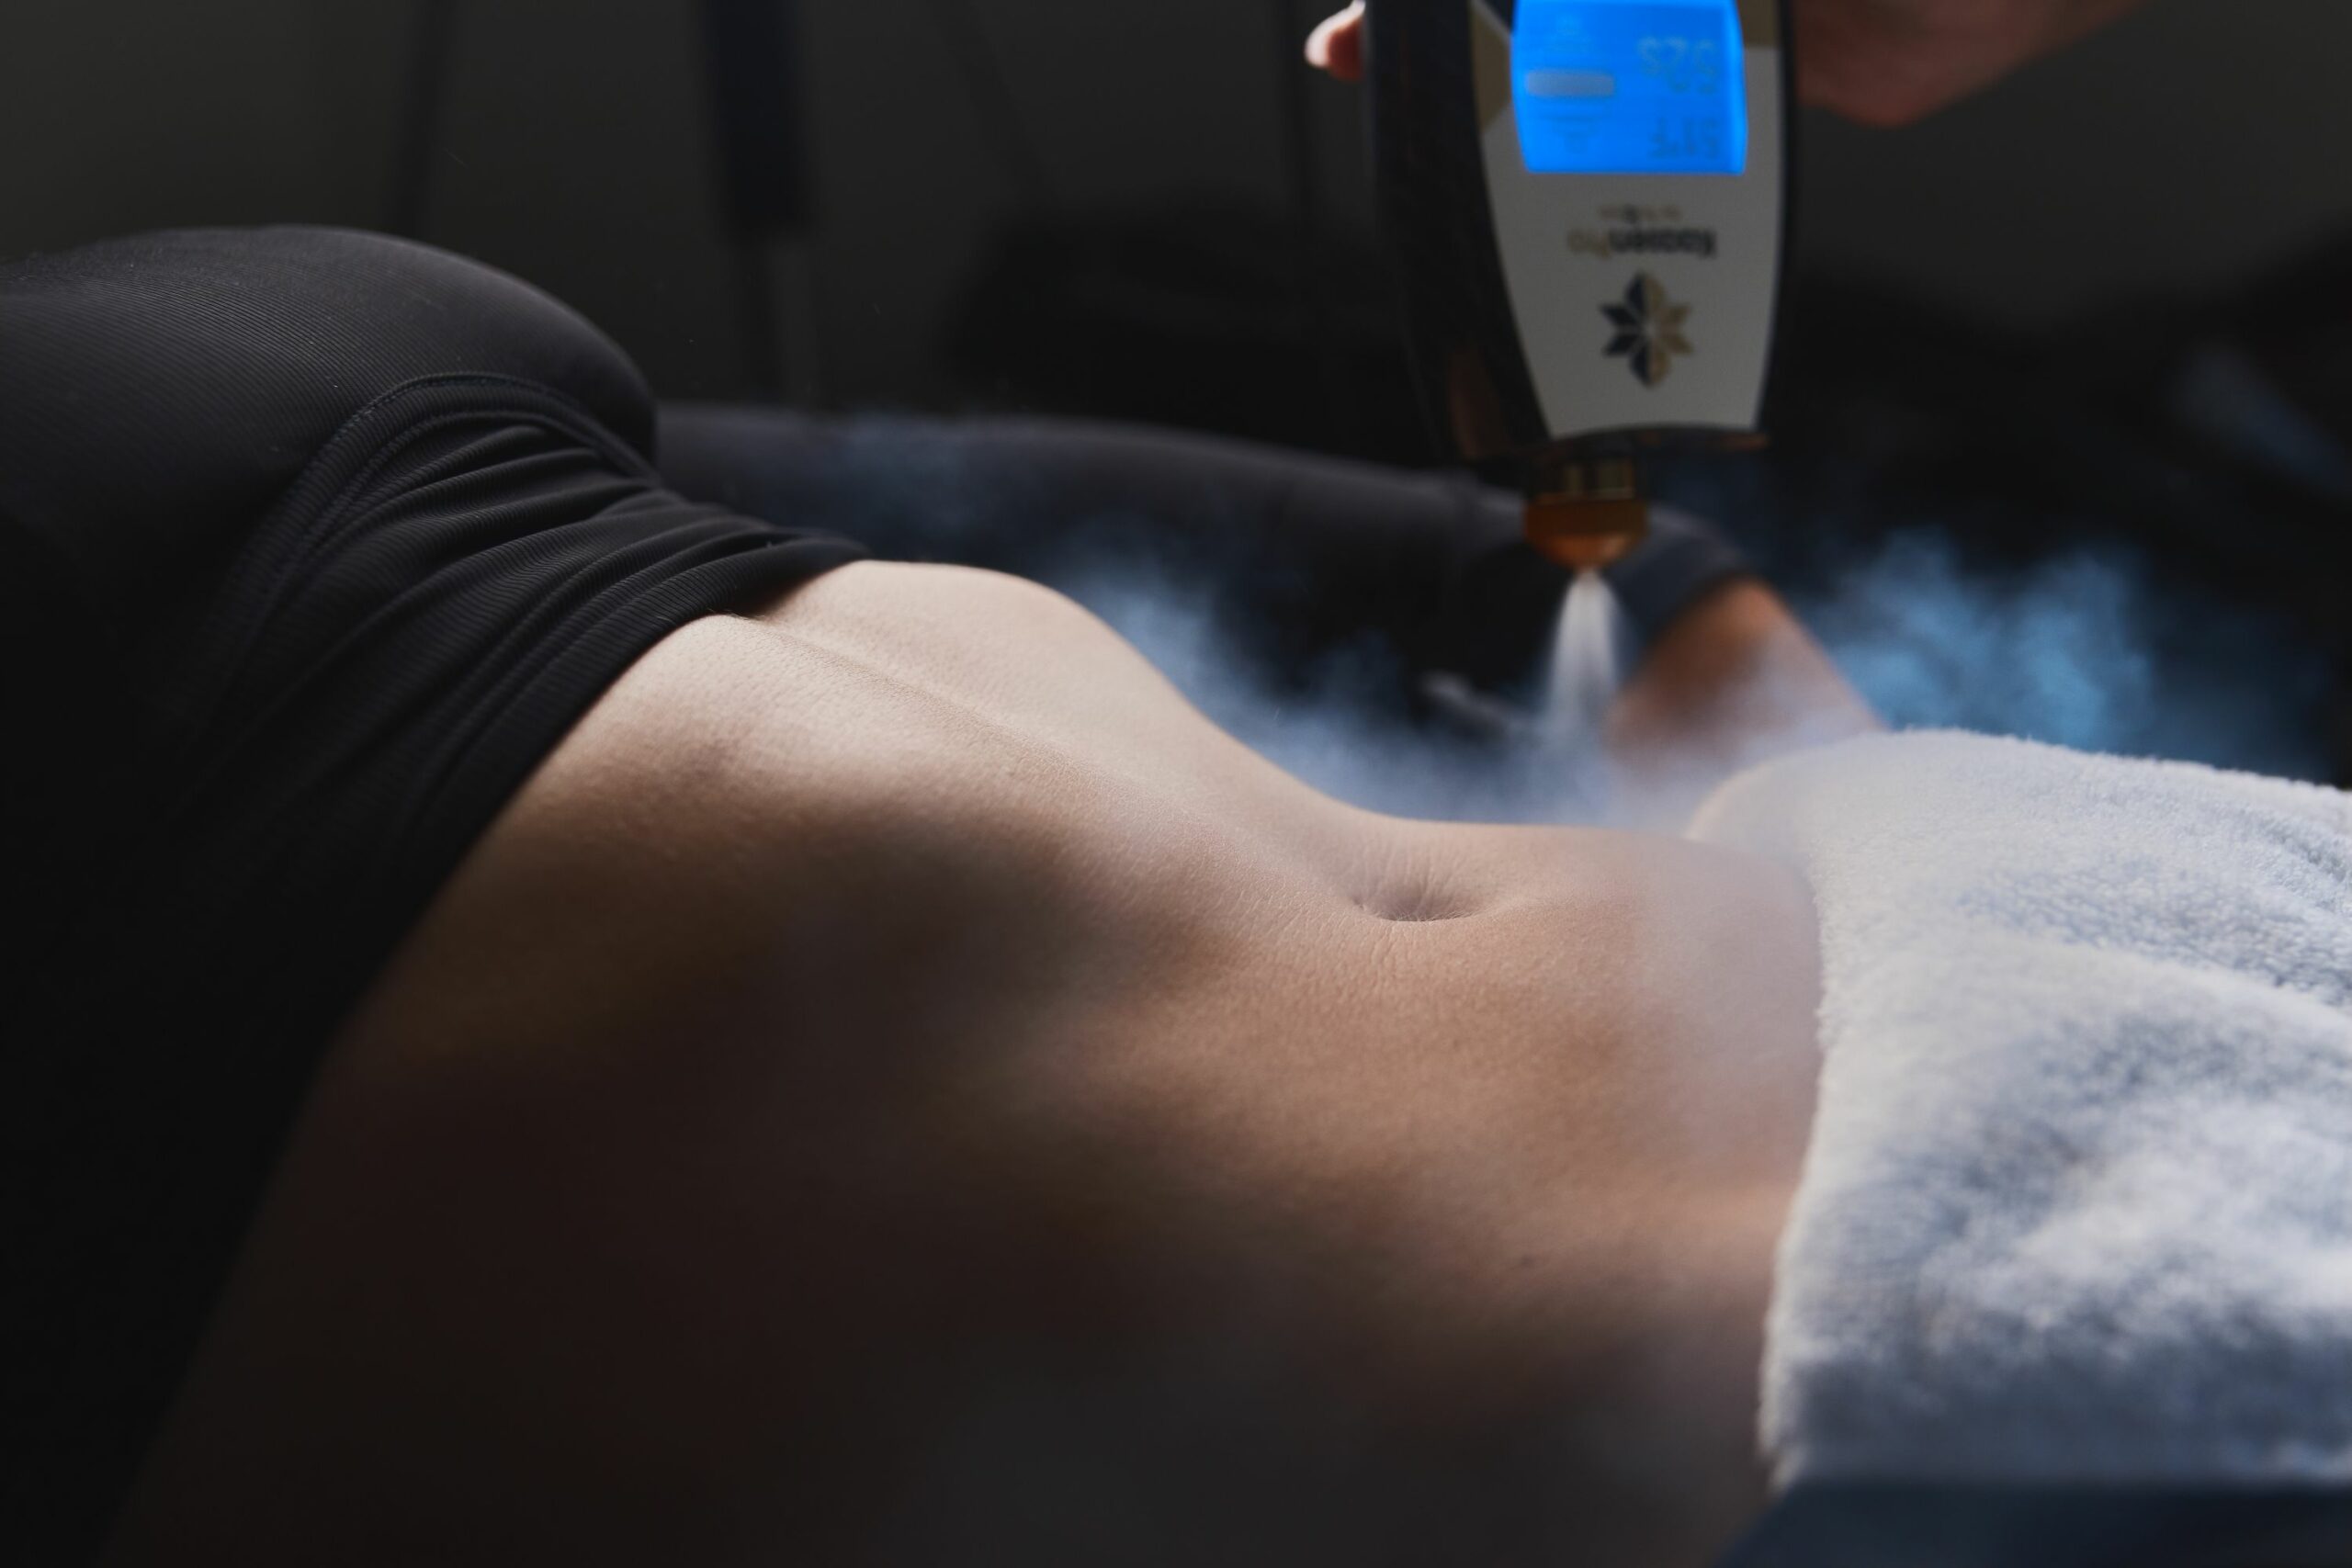 A woman receiving cryo slimming treatment on her stomach